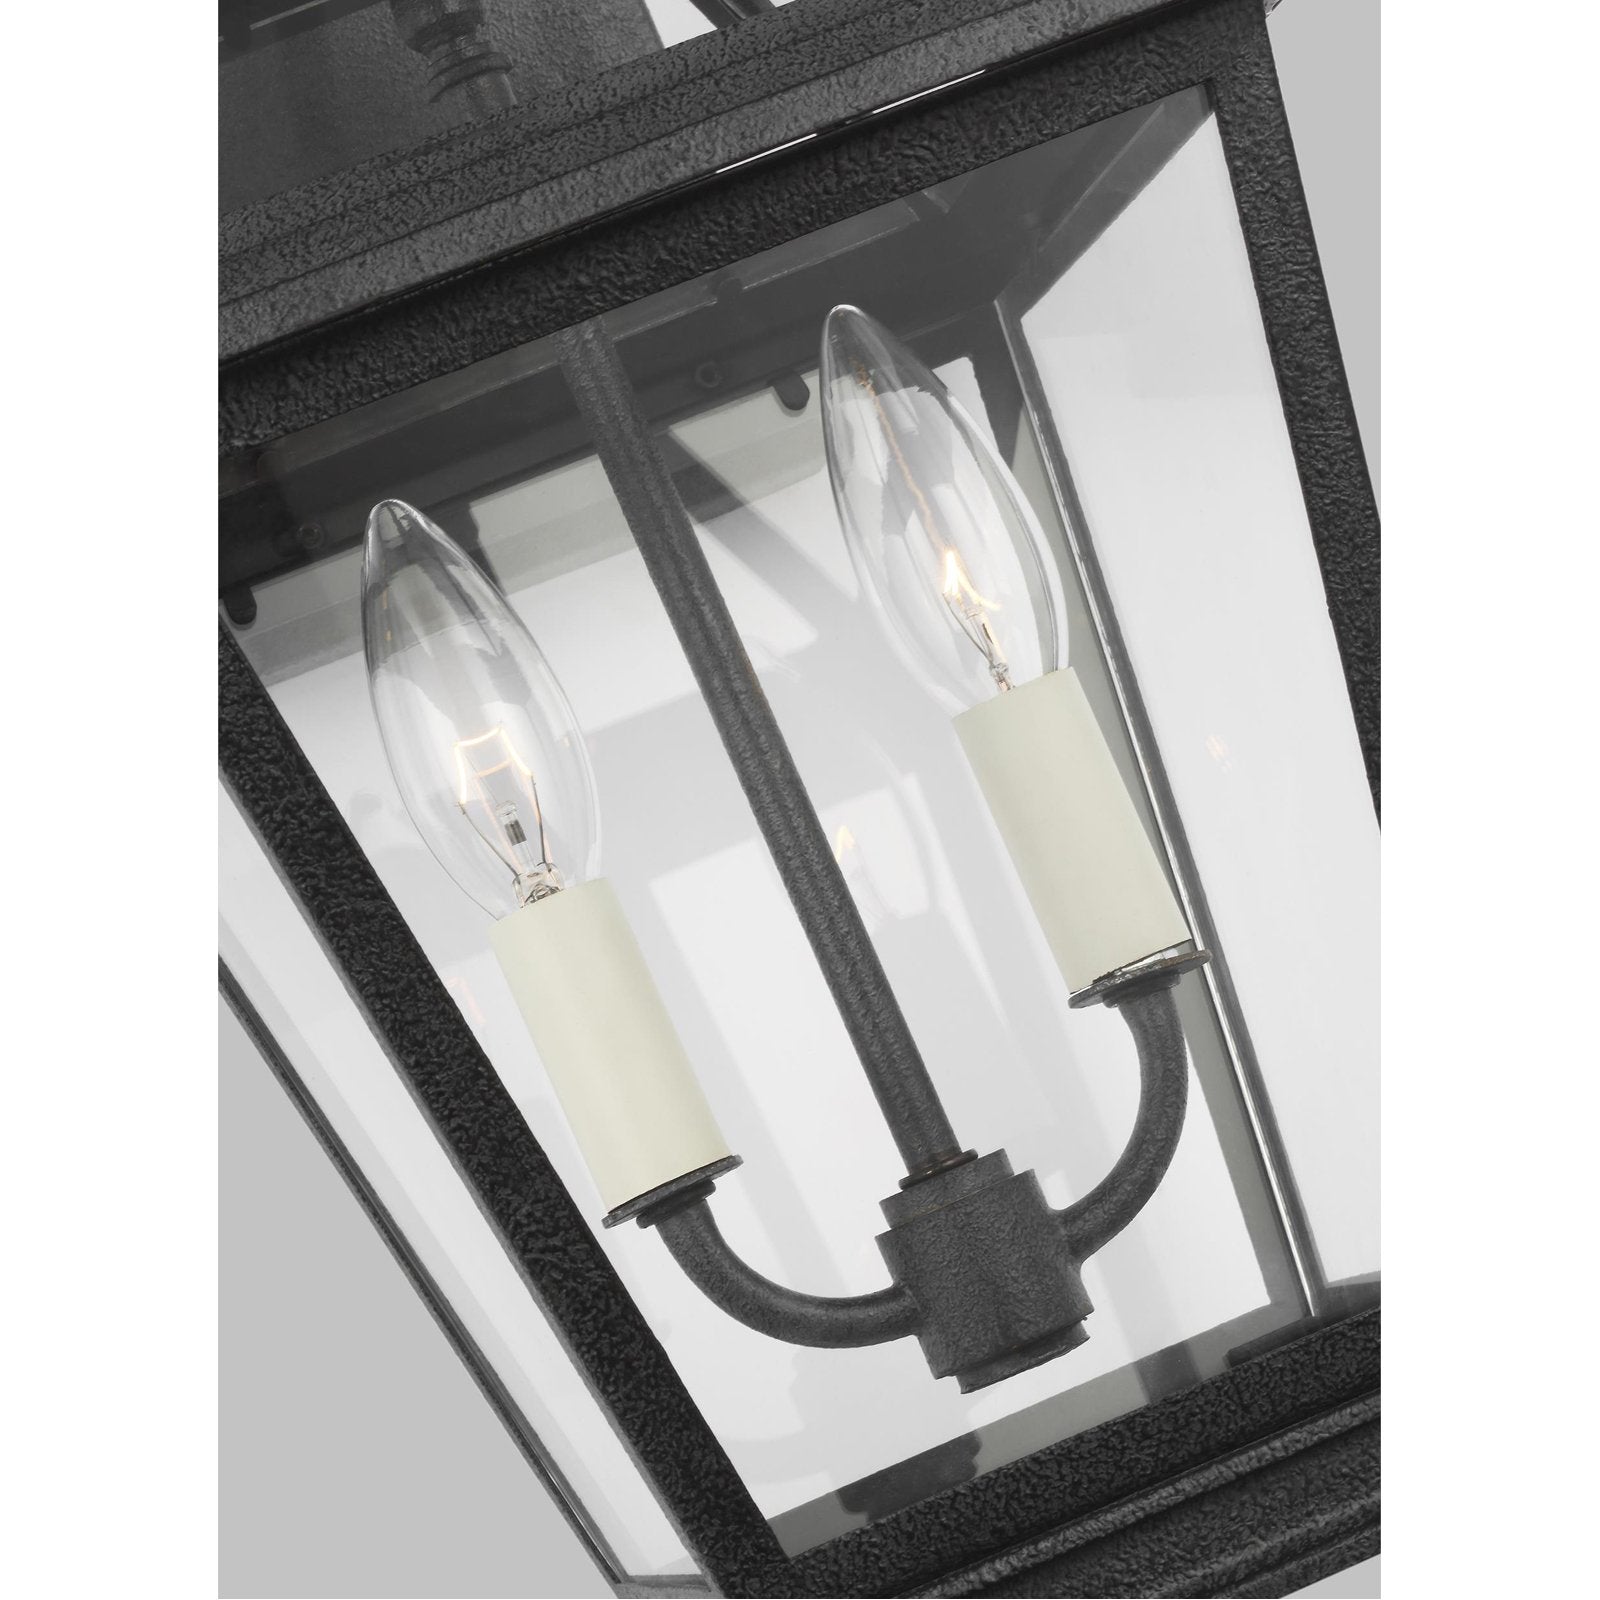 Feiss Falmouth Small Outdoor Wall Lantern